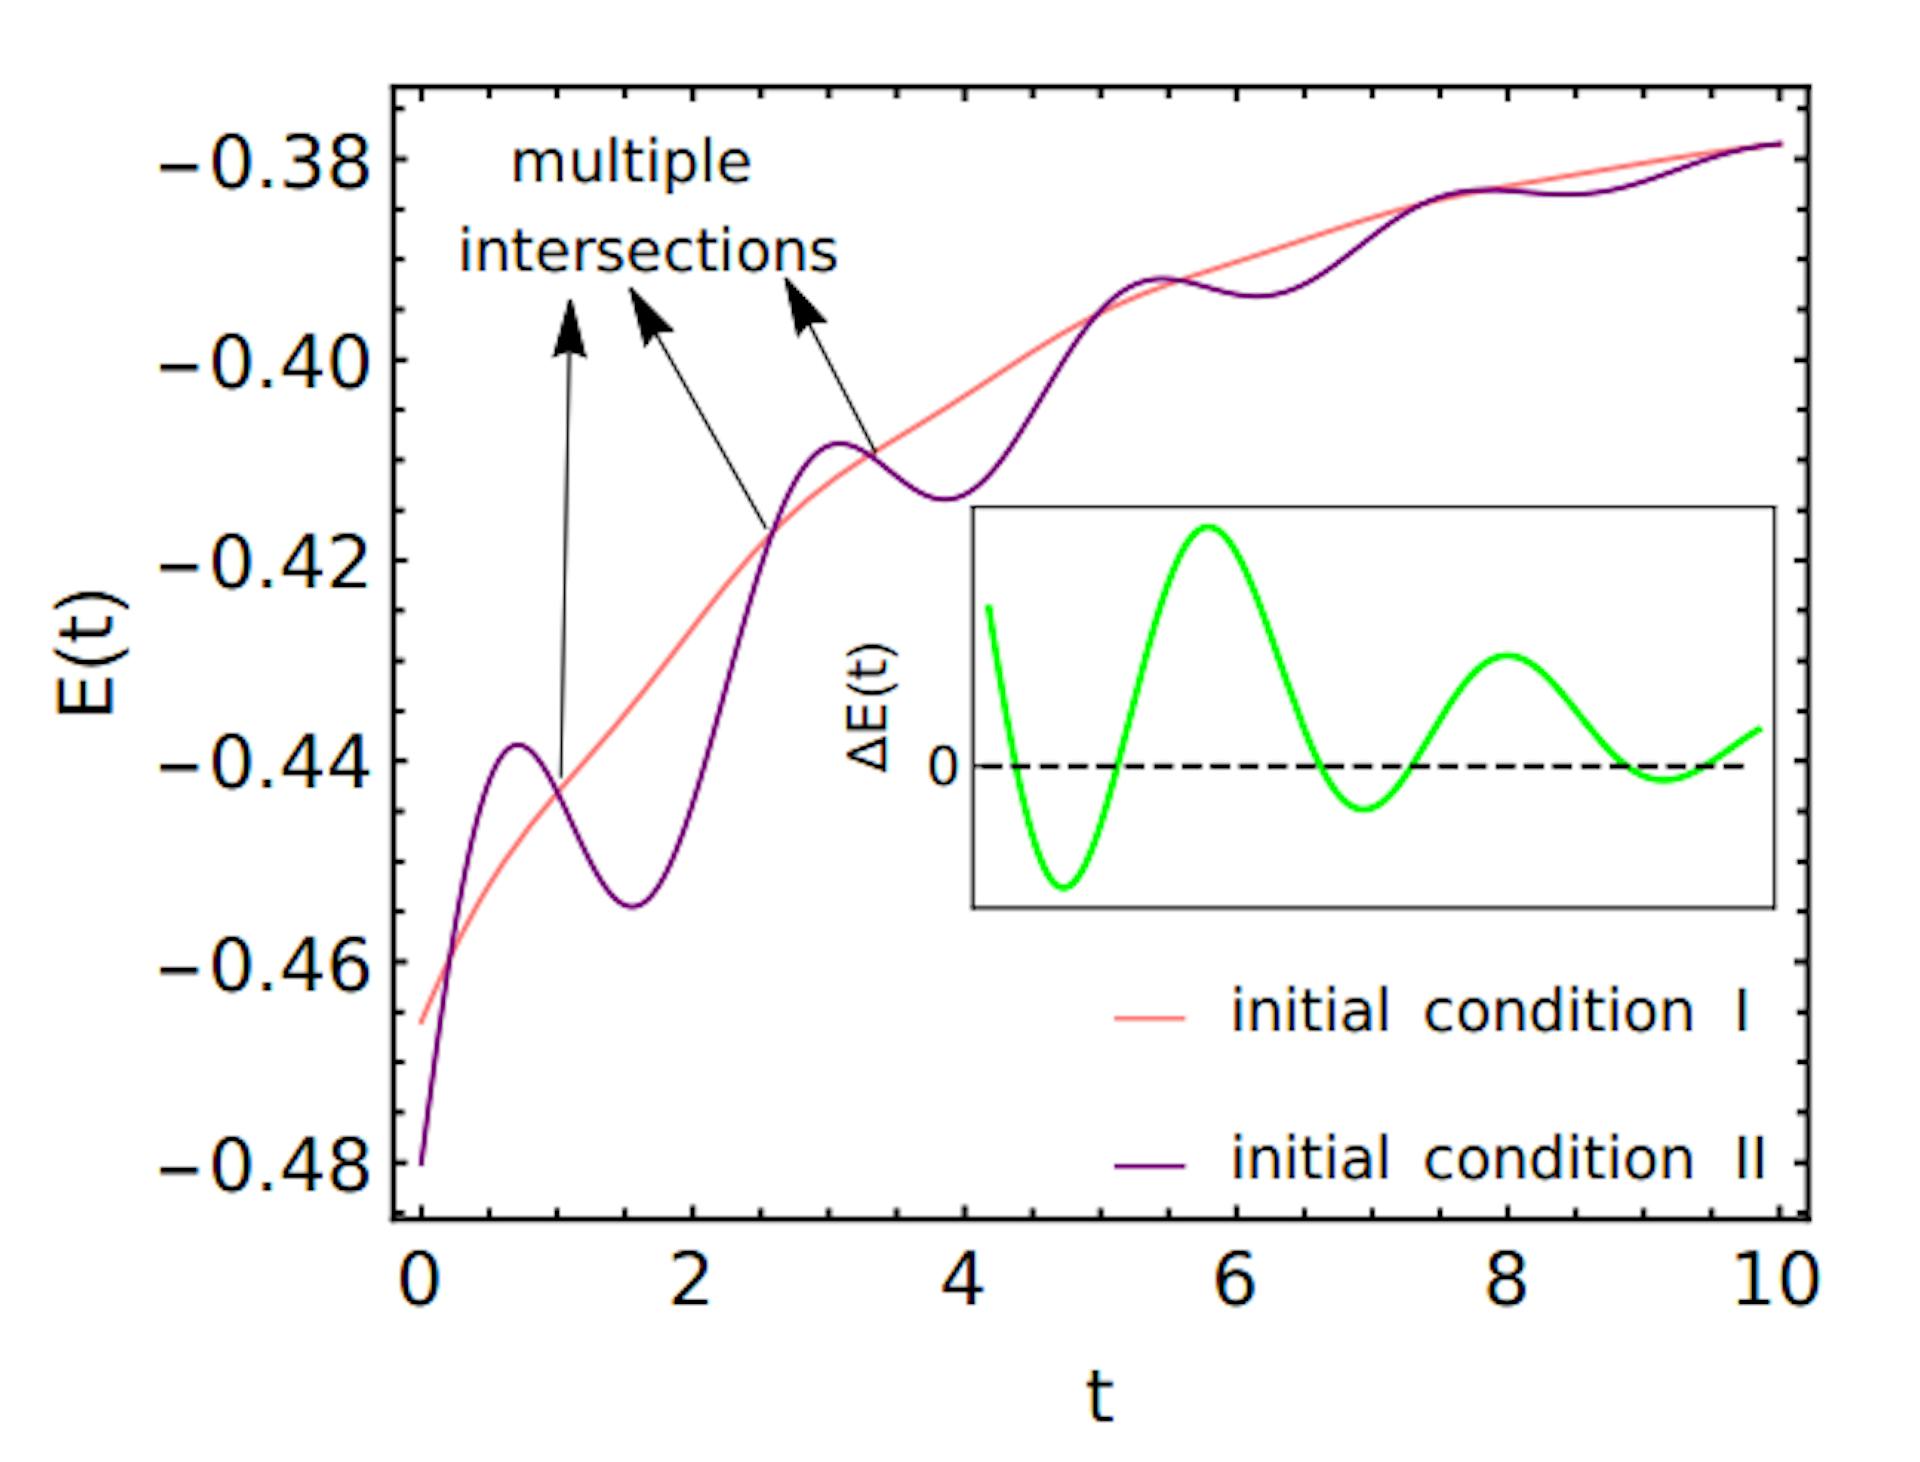 FIG. 8. The figure illustrates multiple QMPE in average energy where two copies I and II relaxes with oscillations and intersect each other multiple times showing multiple QMPE. The inset shows the energy difference between the two copies intersect zero multiple times, leading to multiple QMPE in energy. Parameters used are same as in Fig. 7.